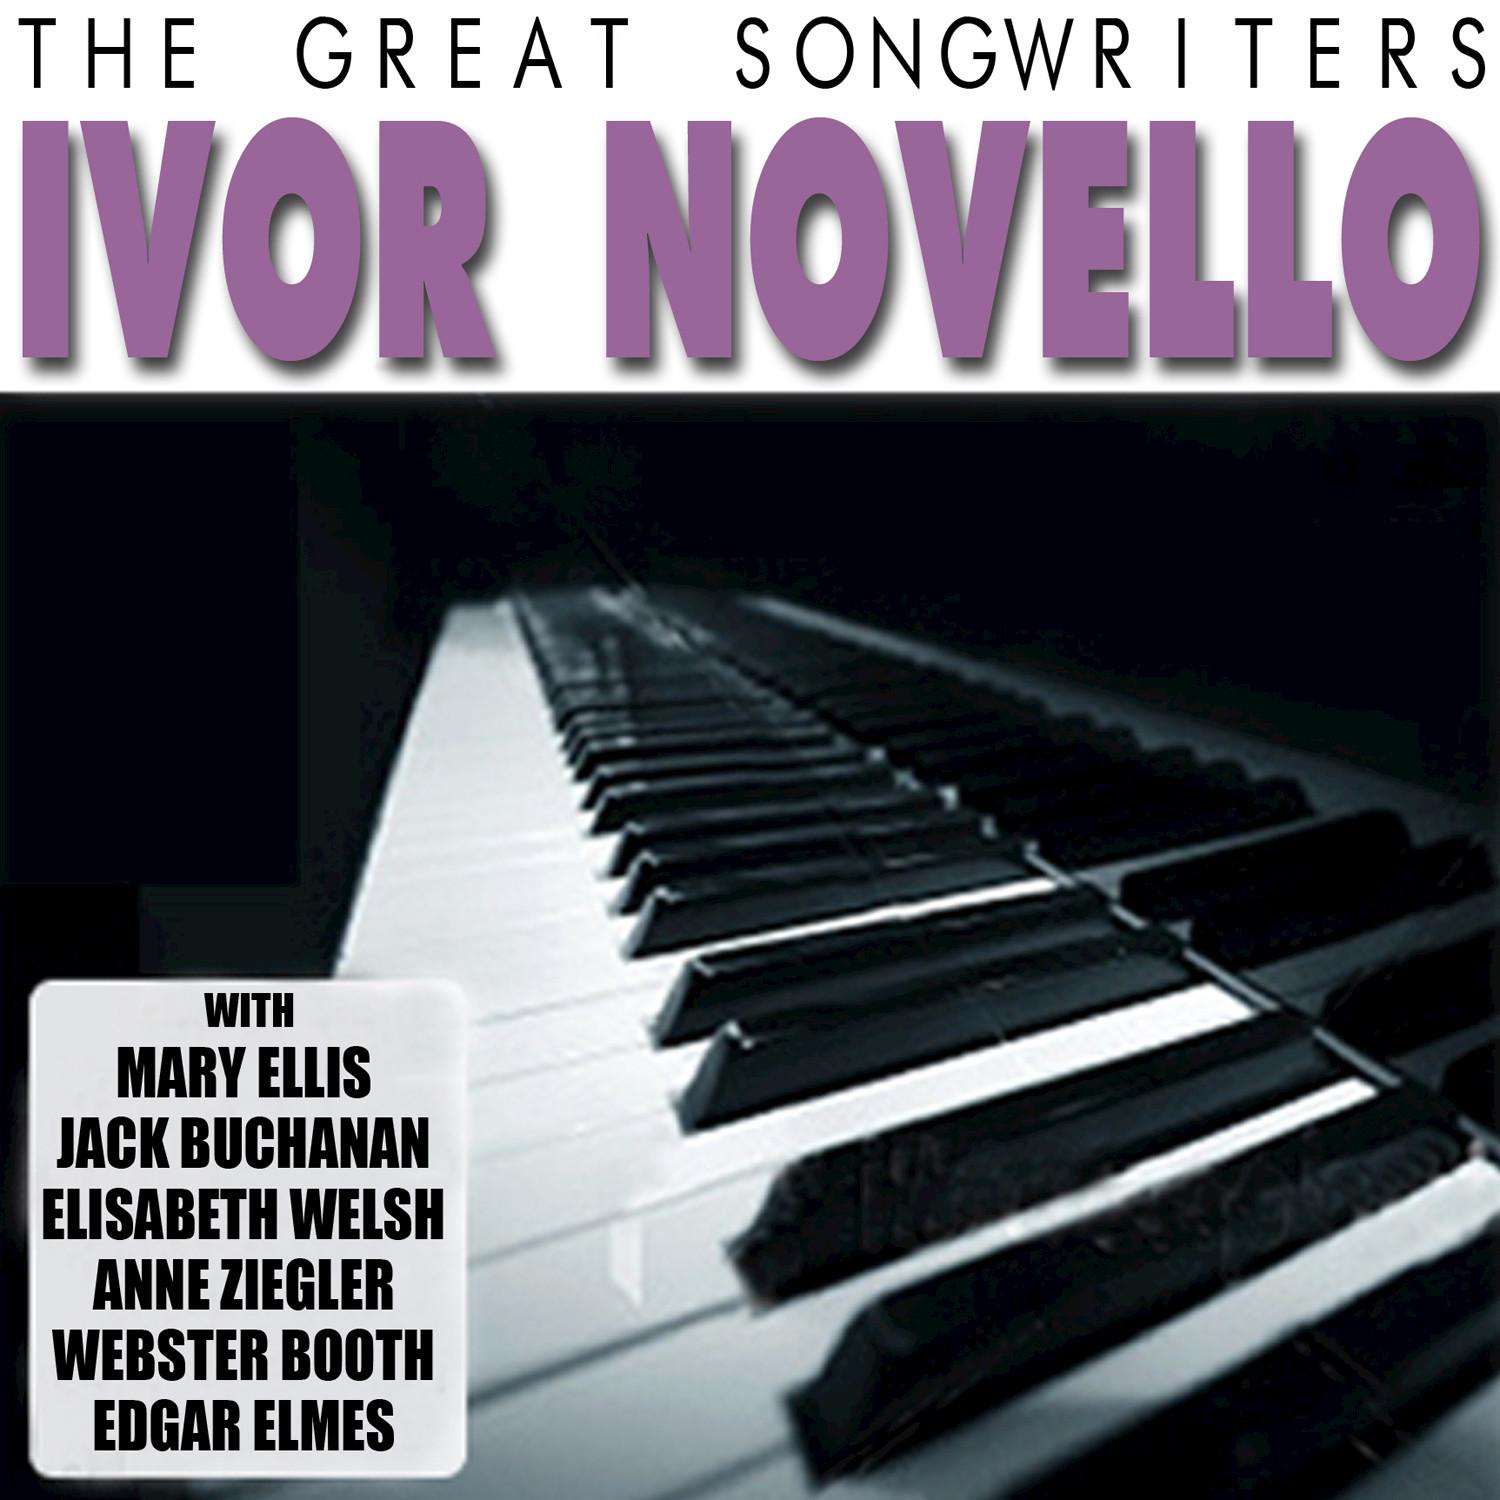 The Great Songwriters - Ivor Novello